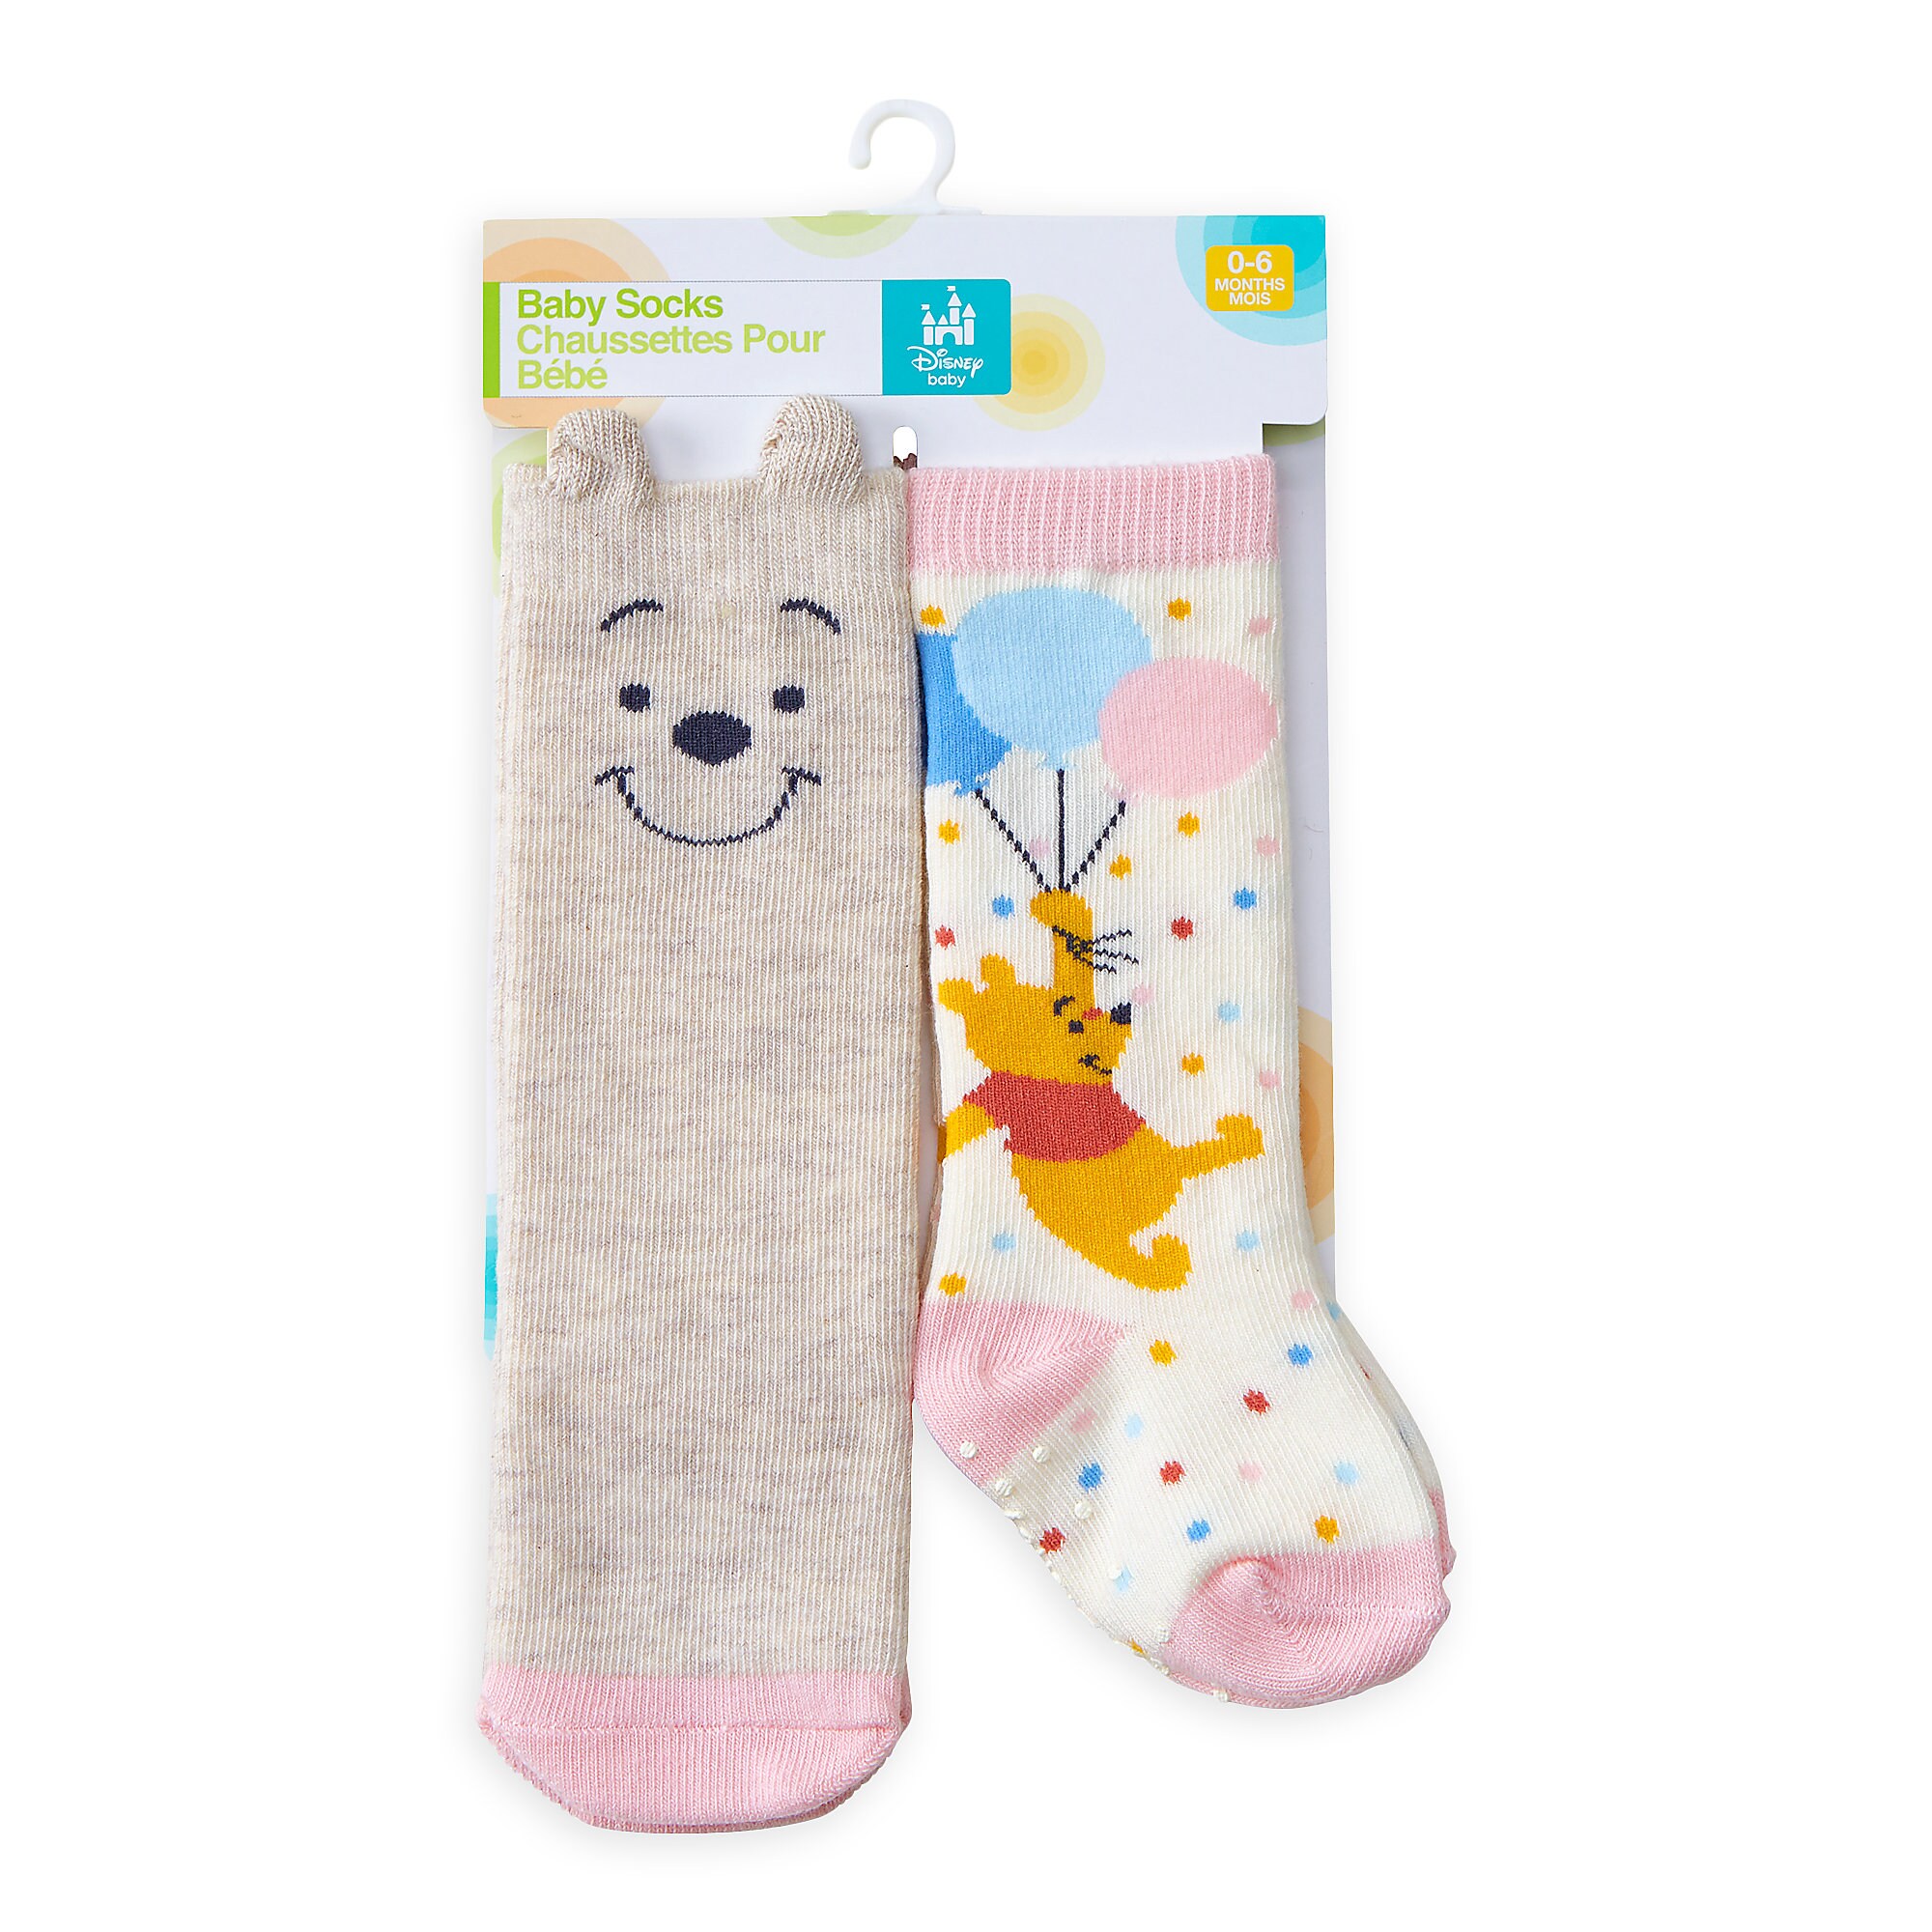 Winnie the Pooh Socks Set for Baby - 2-Pack